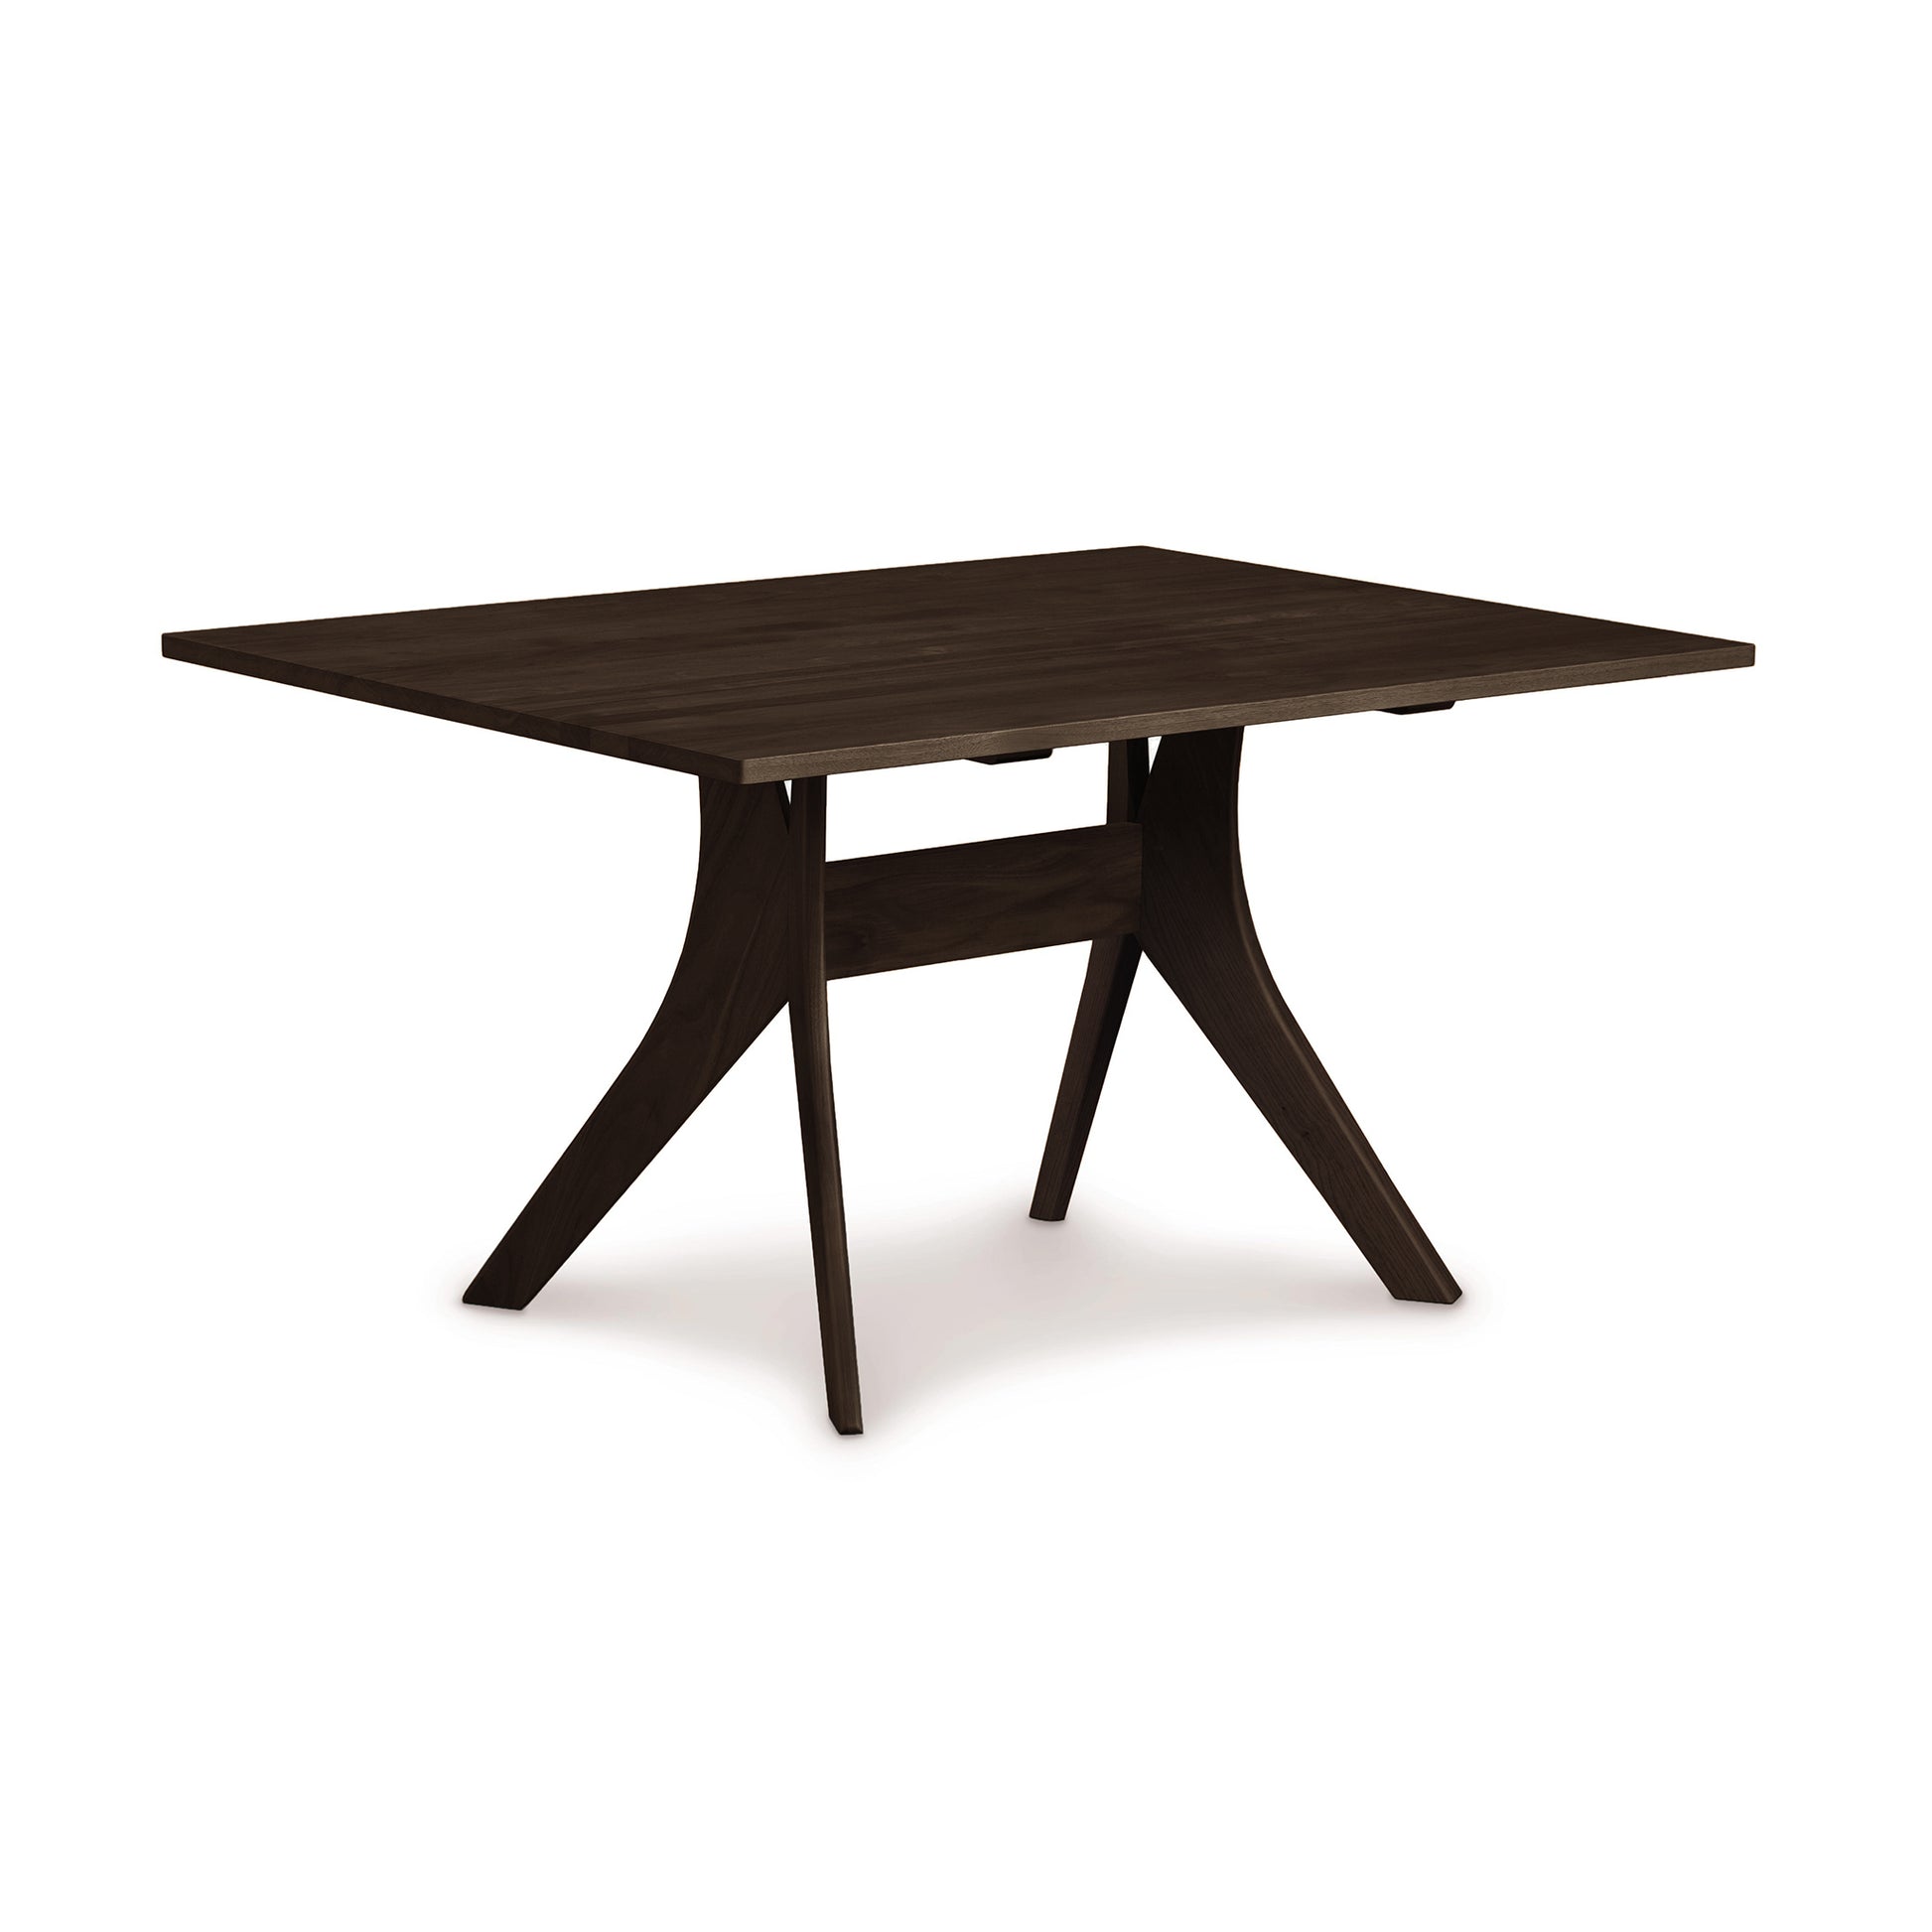 A dark brown hardwood Audrey Solid Top dining table with angled legs and a rectangular top, isolated on a white background by Copeland Furniture.